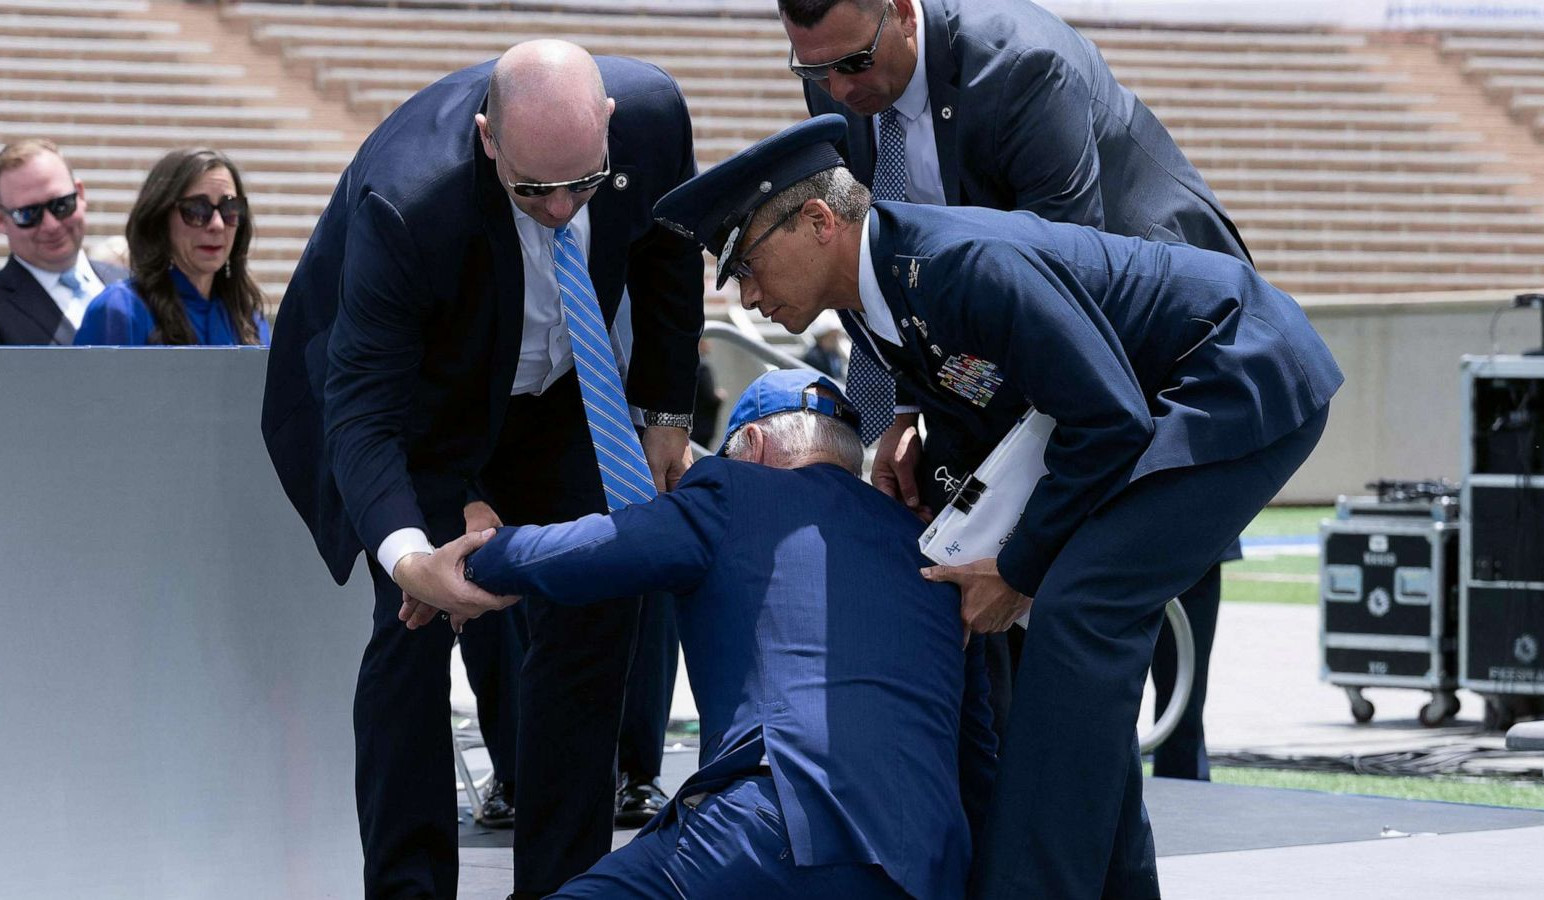 Biden trips and falls during graduation ceremony, recovers quickly